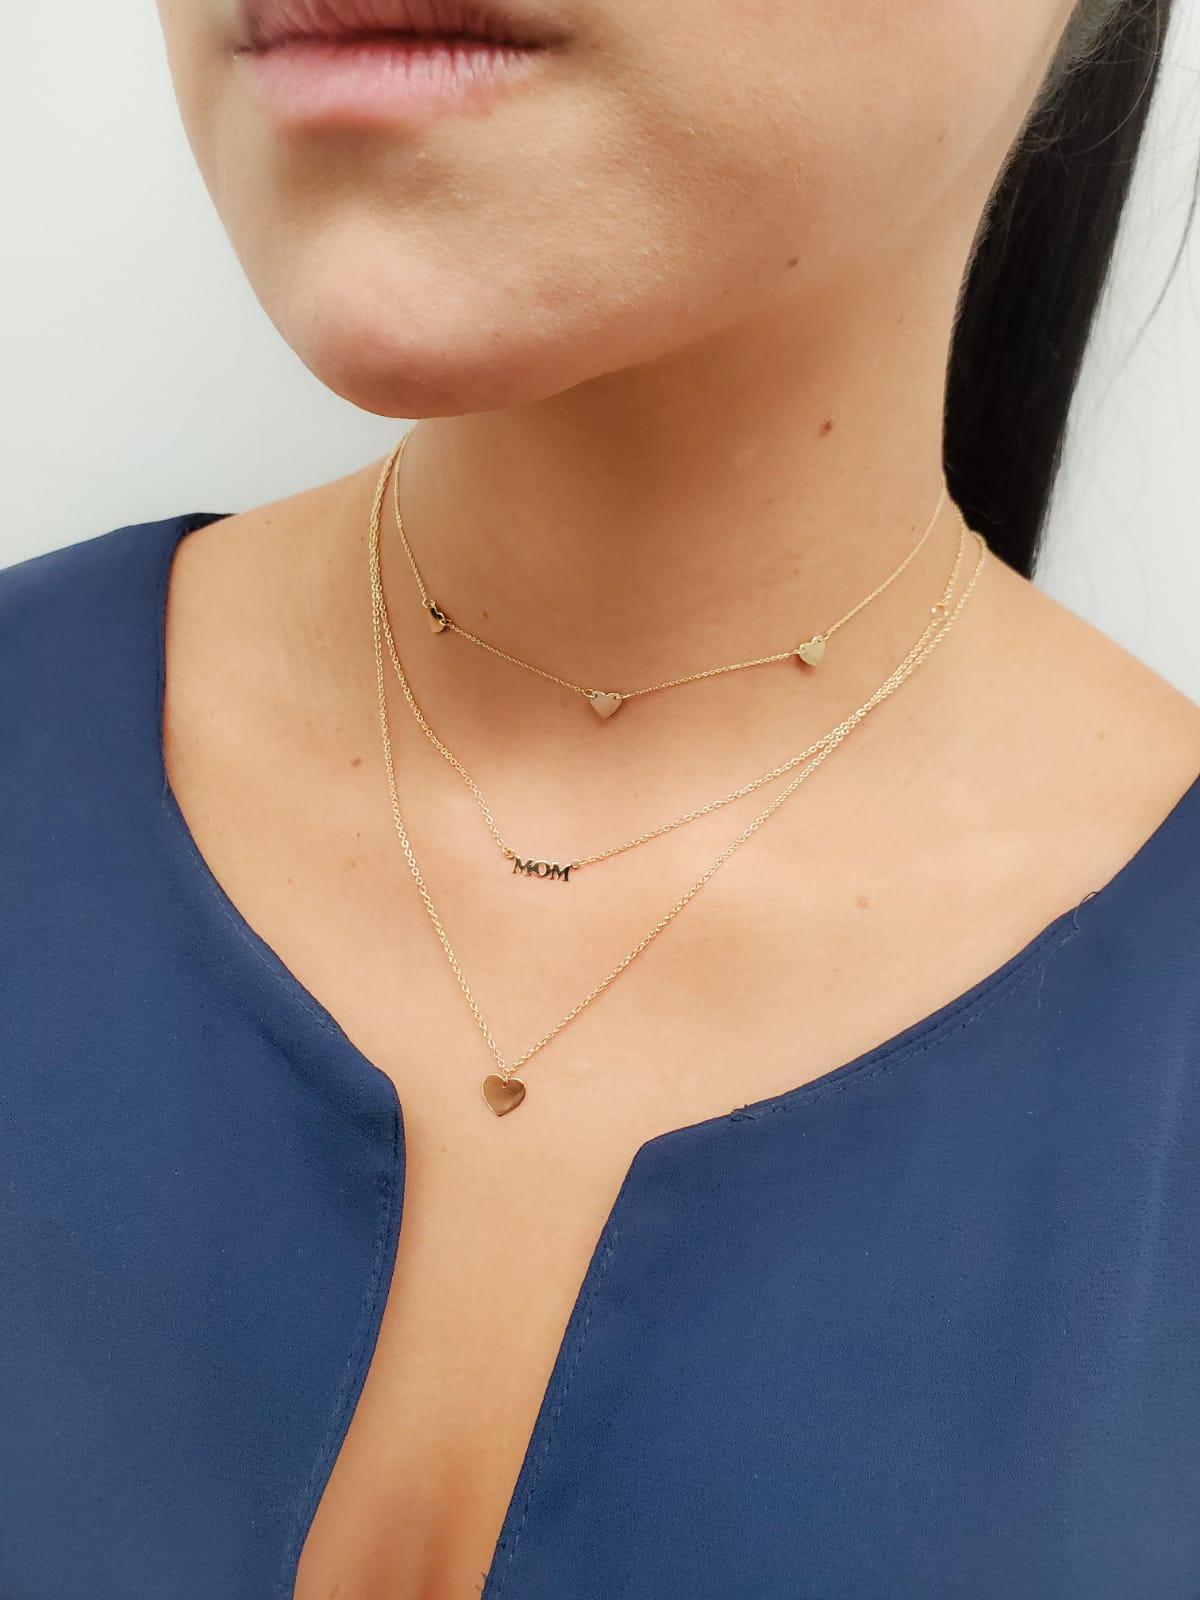 Miniature MOM Cut Out Necklace